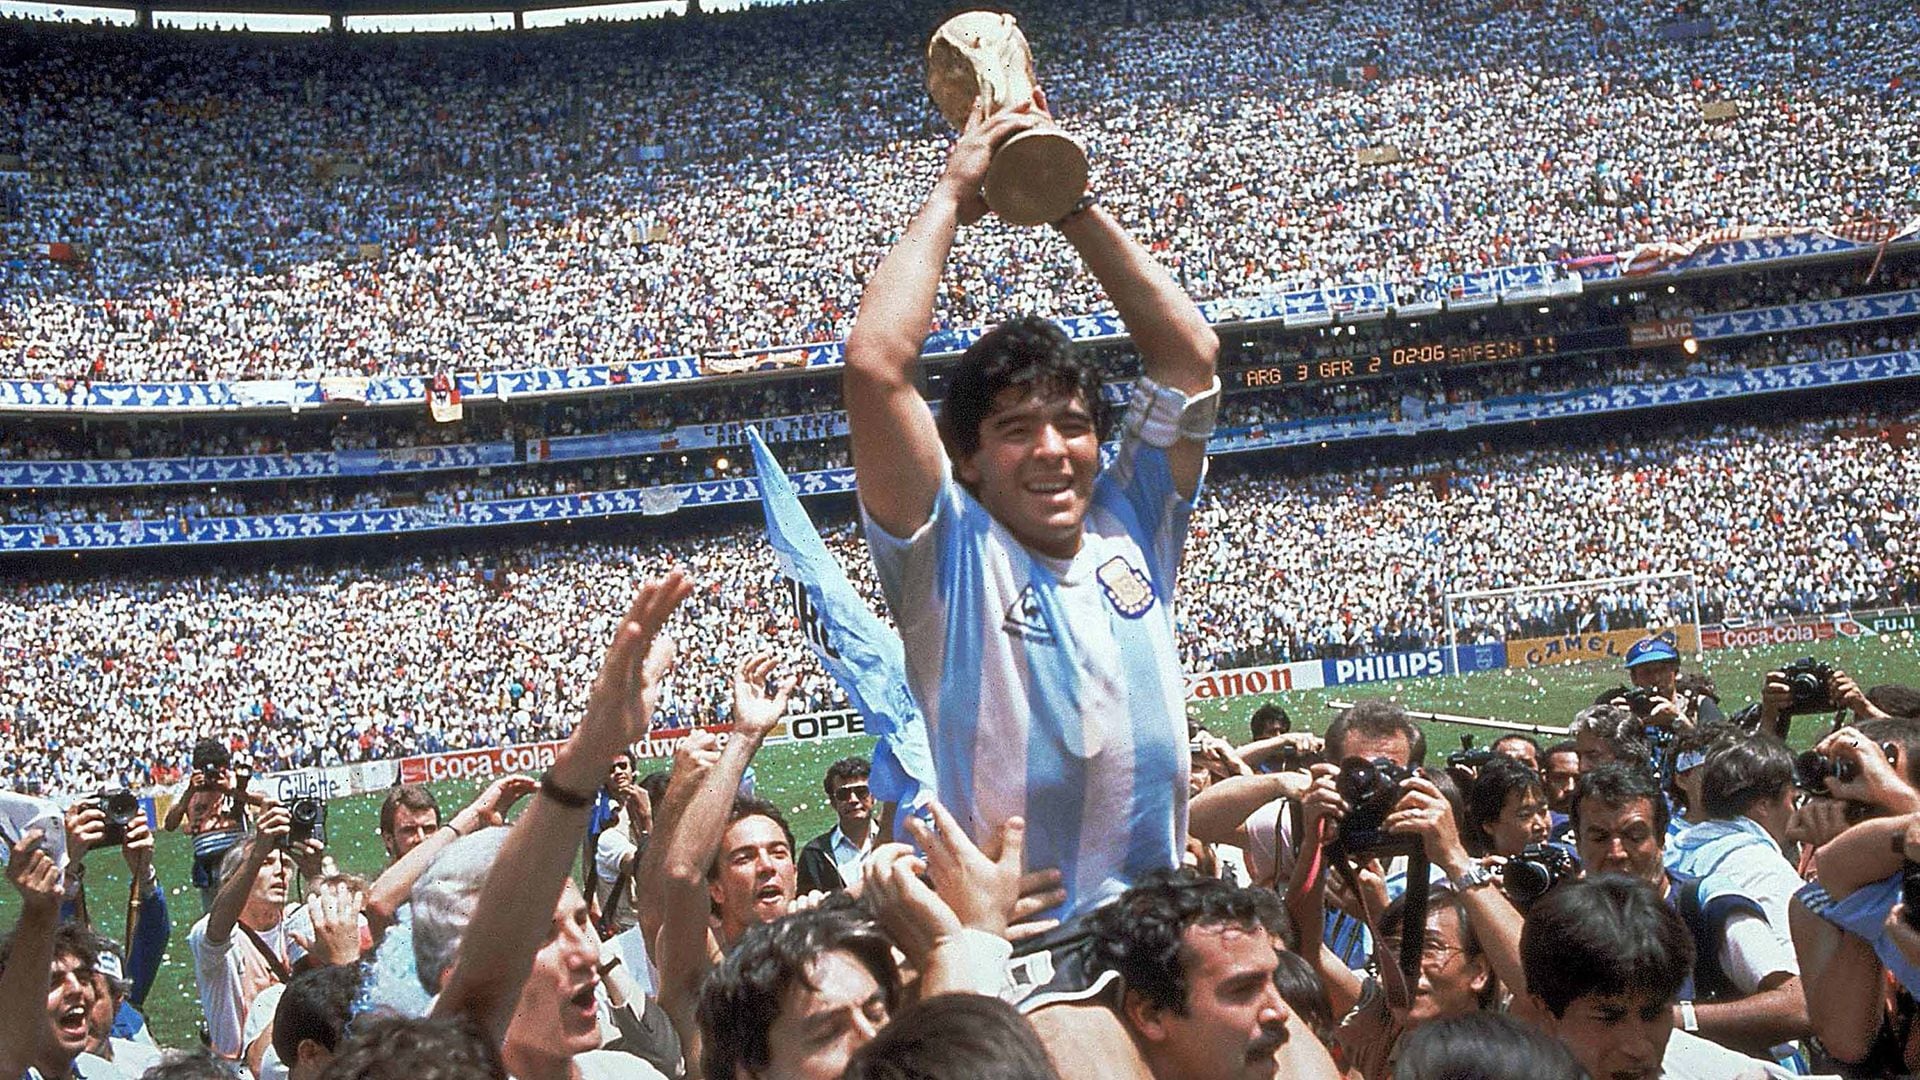 **  FILE  ** Argentina's Diego Maradona, holding up the trophy, is carried on shoulders as he celebrates at the end of the World Cup soccer final game against West Germany at the Atzeca Stadium, in Mexico City, in this June 29, 1986, file photo. Argentina won 3-2. Maradona and Argentinean coach Carlos Bilardo have been asked to lead Argentina by Julio Grondona, head of the Argentine Football Association, Tuesday, Oct. 28, 2008. (AP Photo/Carlo Fumagalli, file)